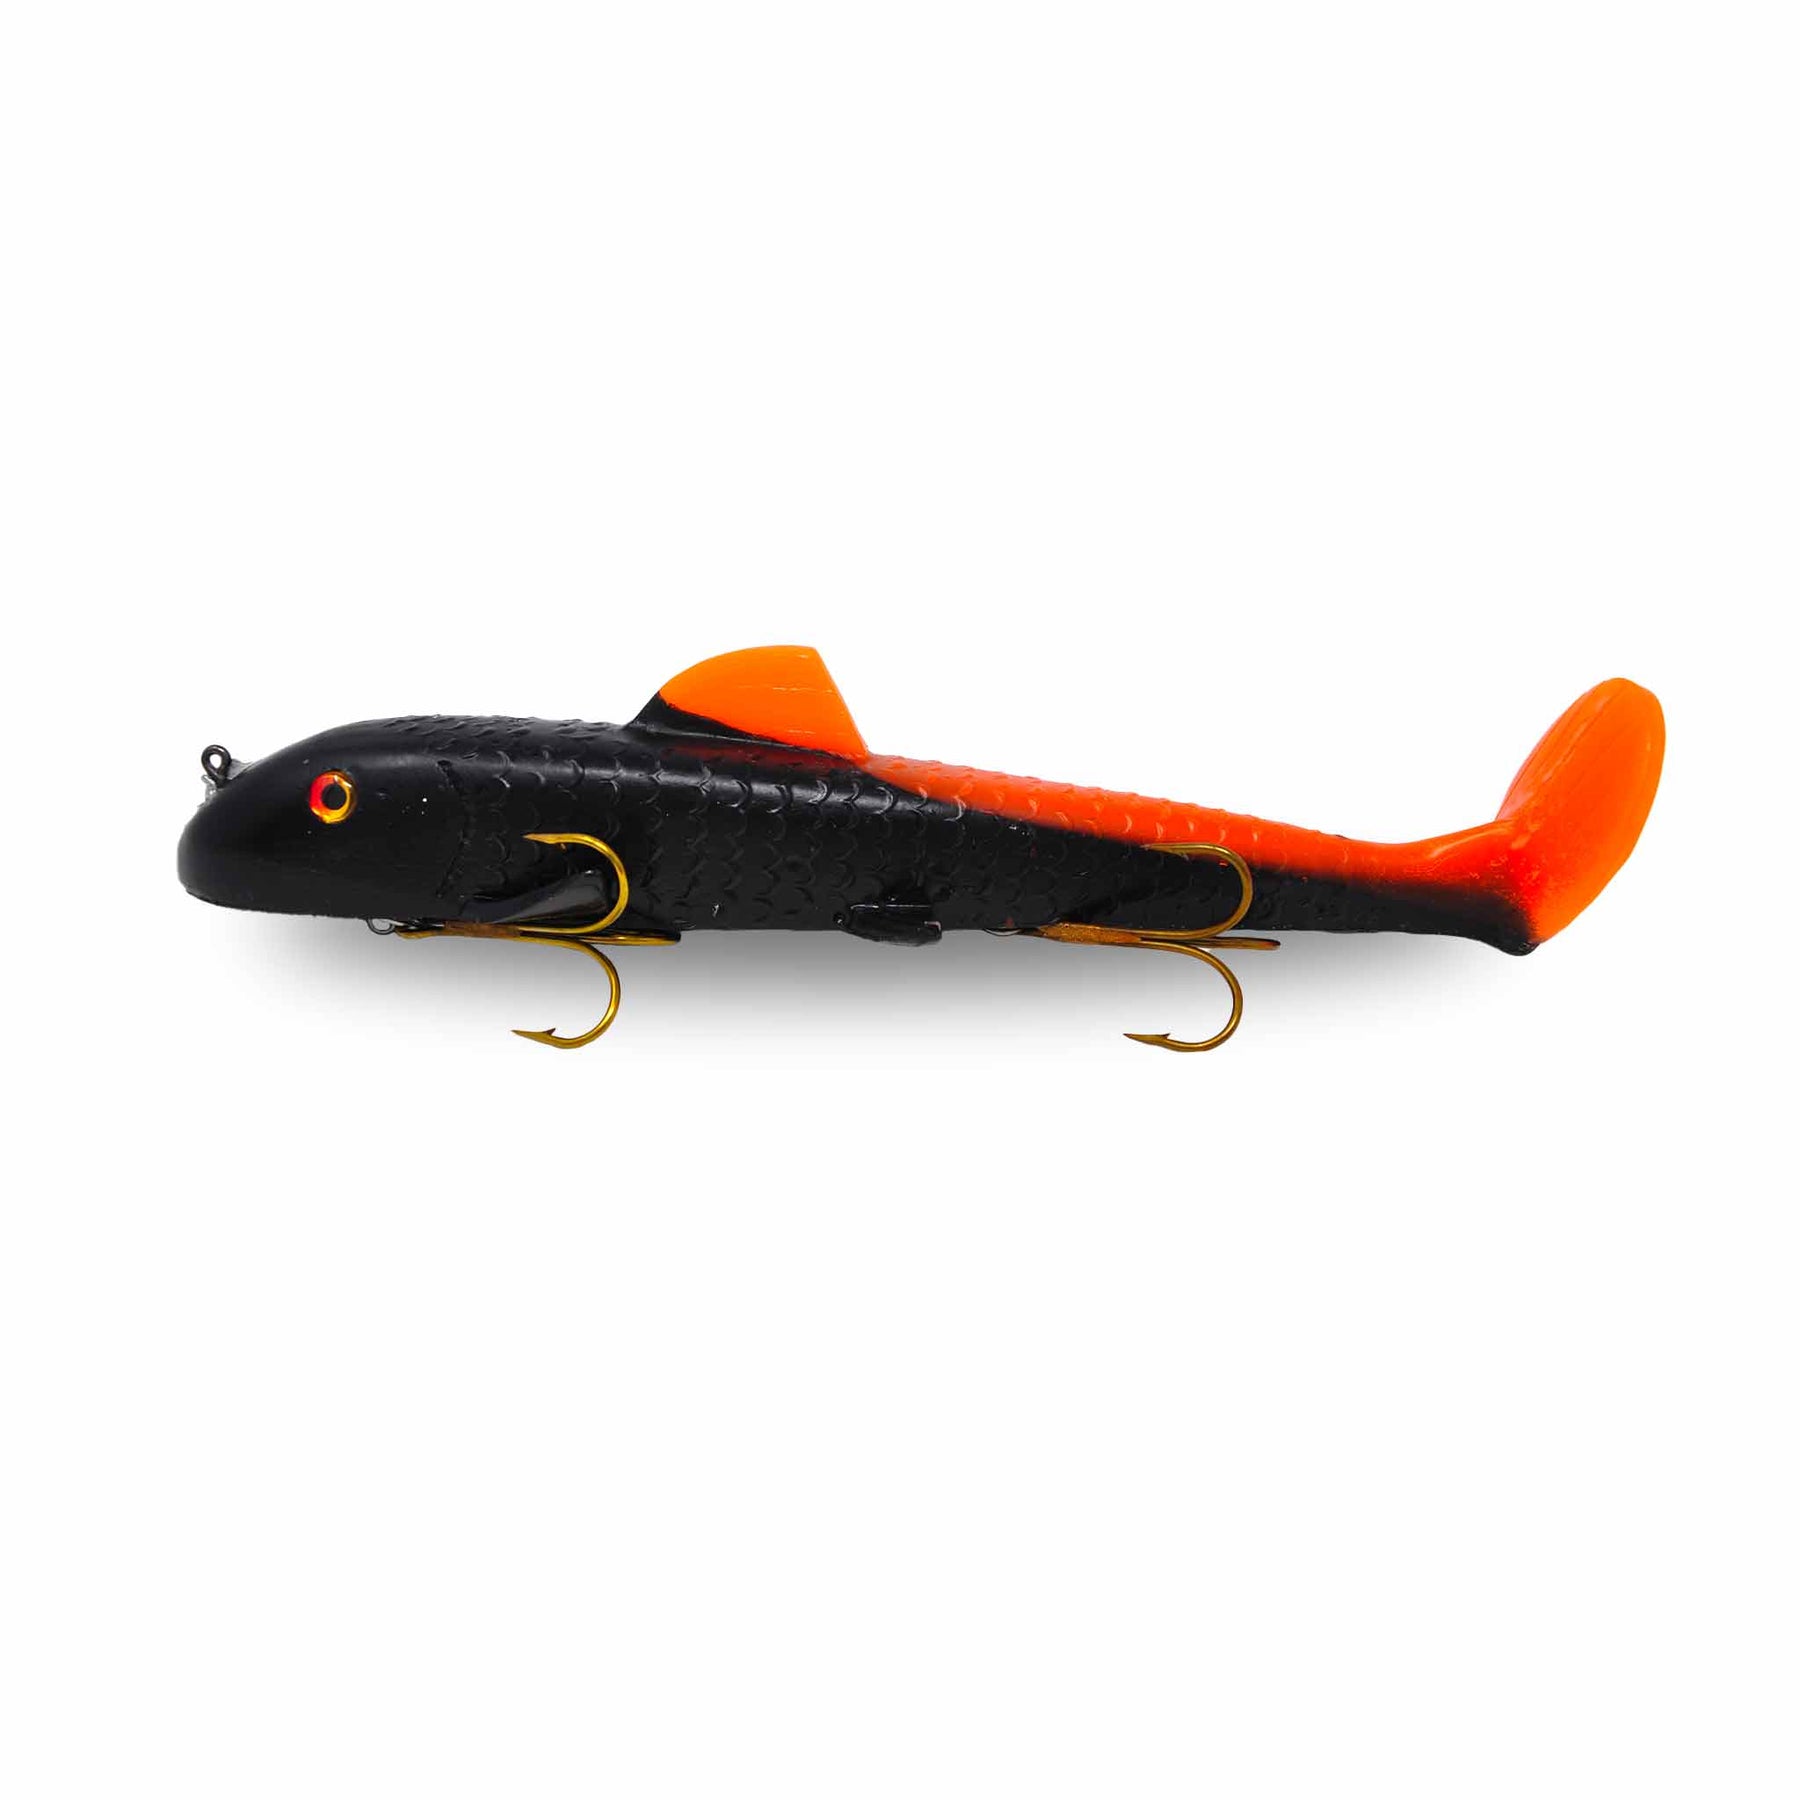 View of Rubber Suick Suzy Sucker 11" Swimbait Black Orange Tail available at EZOKO Pike and Musky Shop